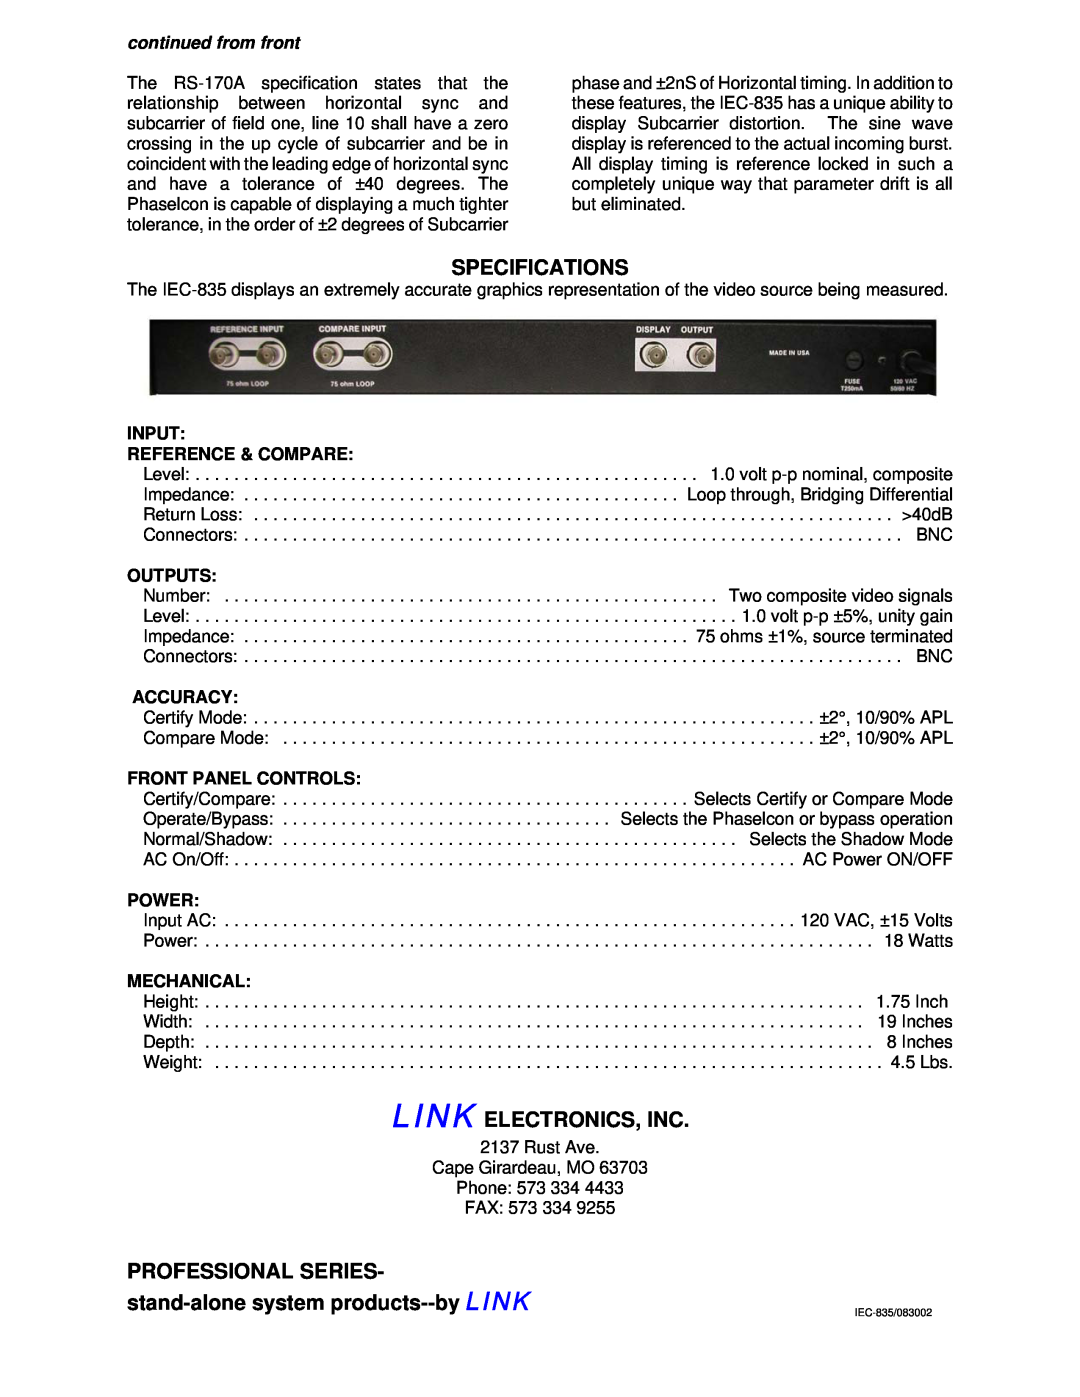 Link electronic IEC-835 manual Input Reference & Compare, Outputs, Accuracy, Front Panel Controls, Power, Mechanical 